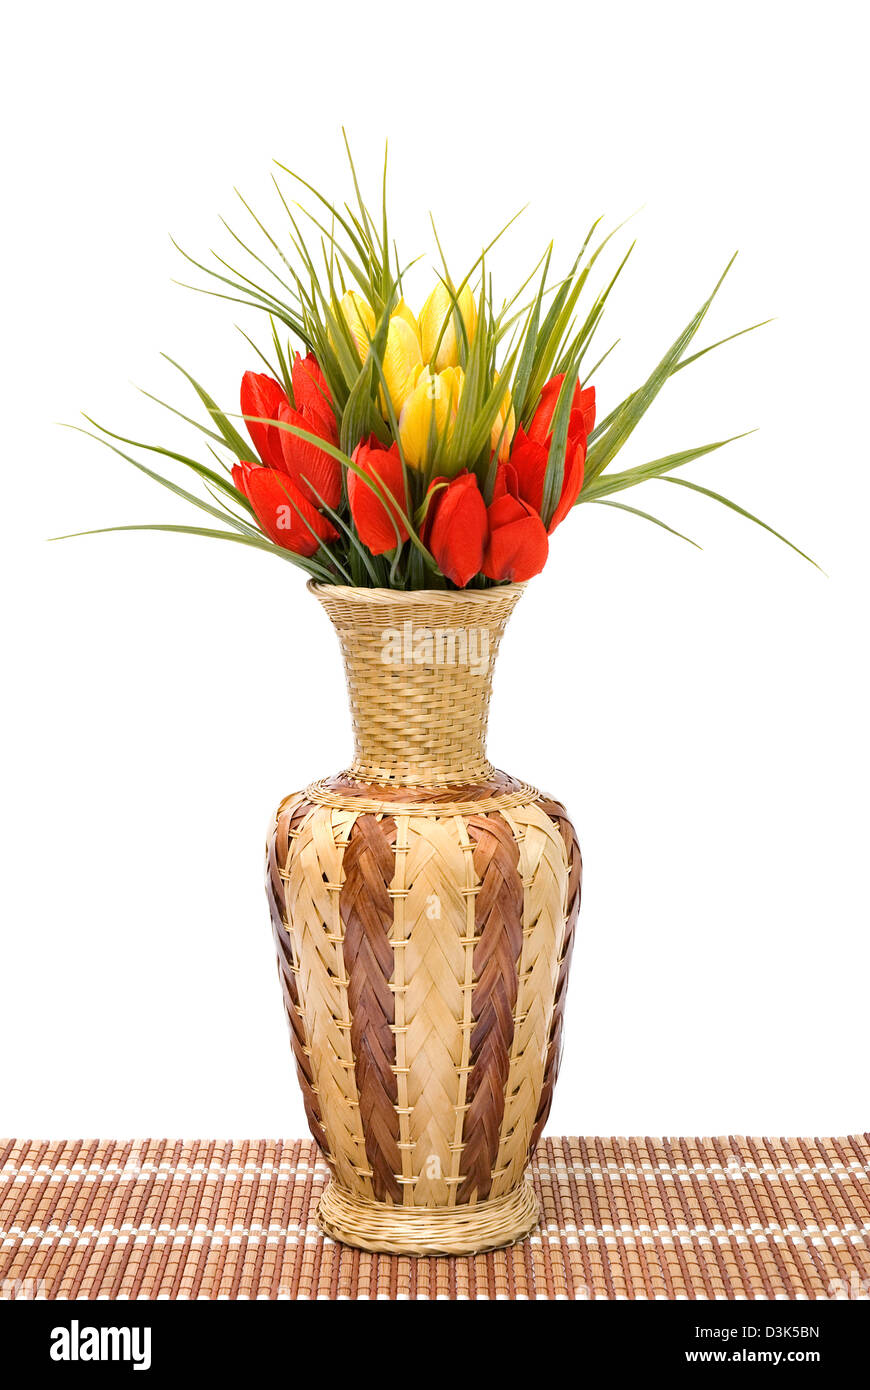 Vase with red and yellow flowers Stock Photo